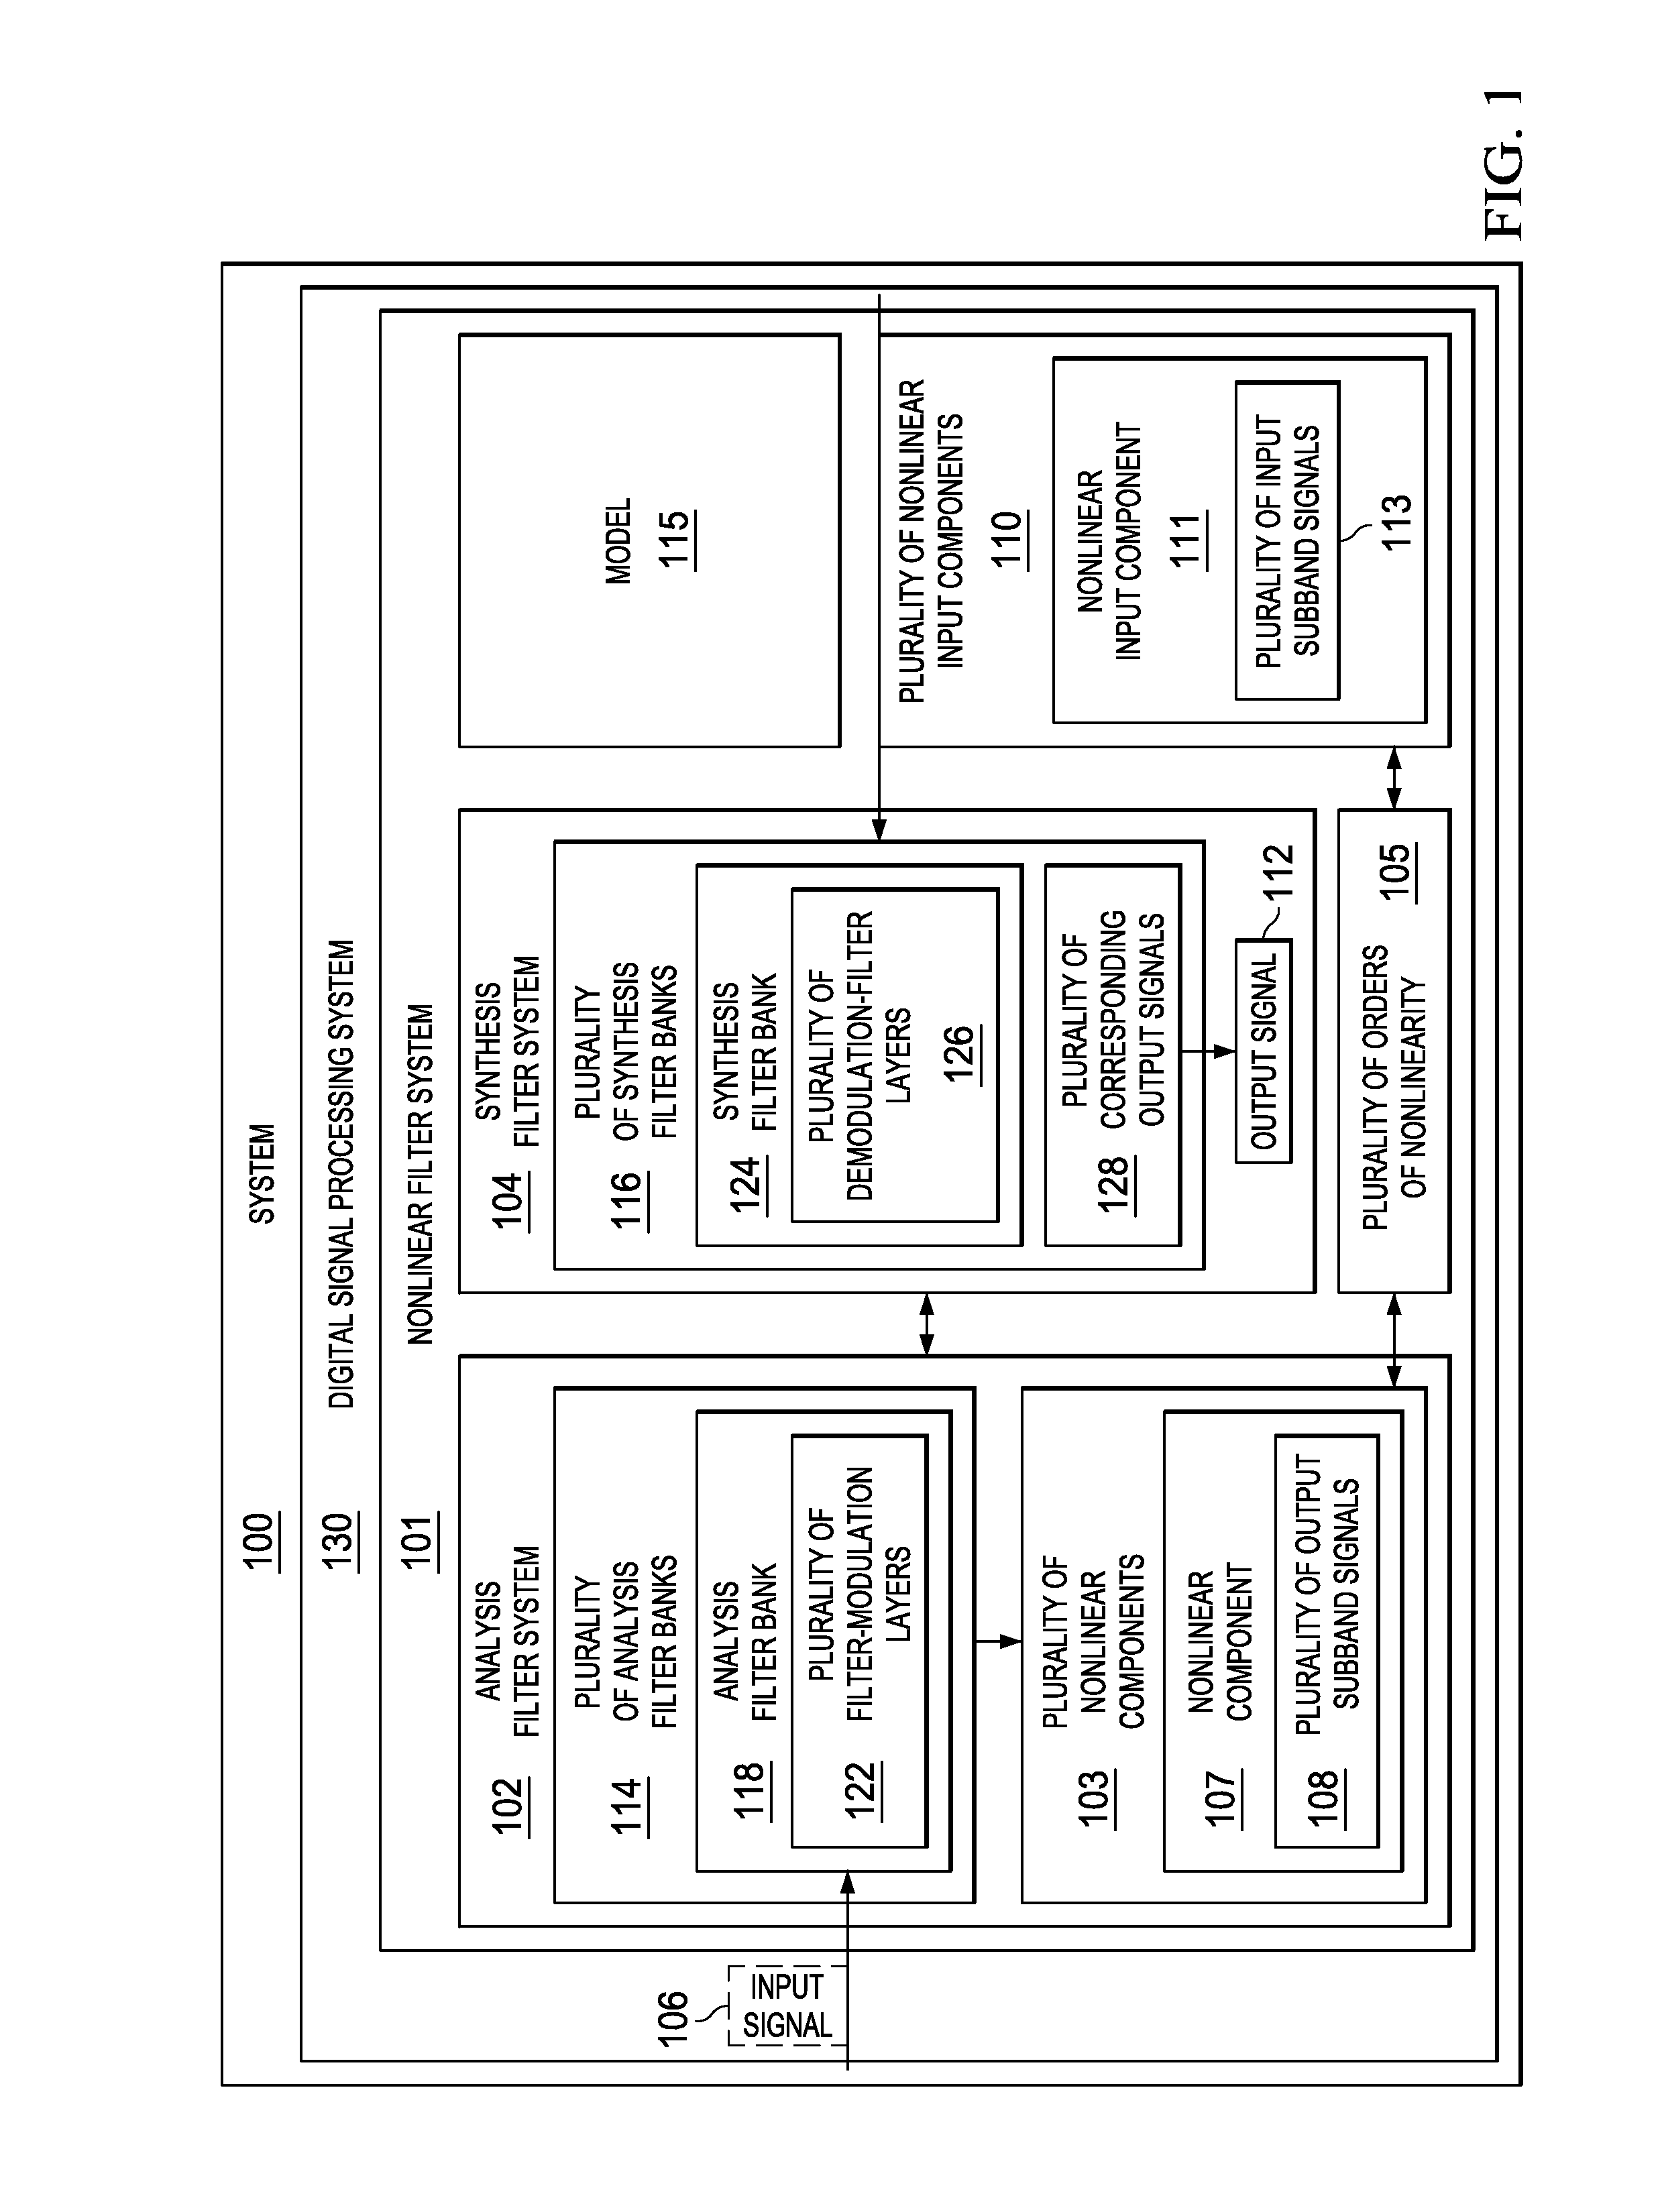 Nonlinear Filtering Using Polyphase Filter Banks